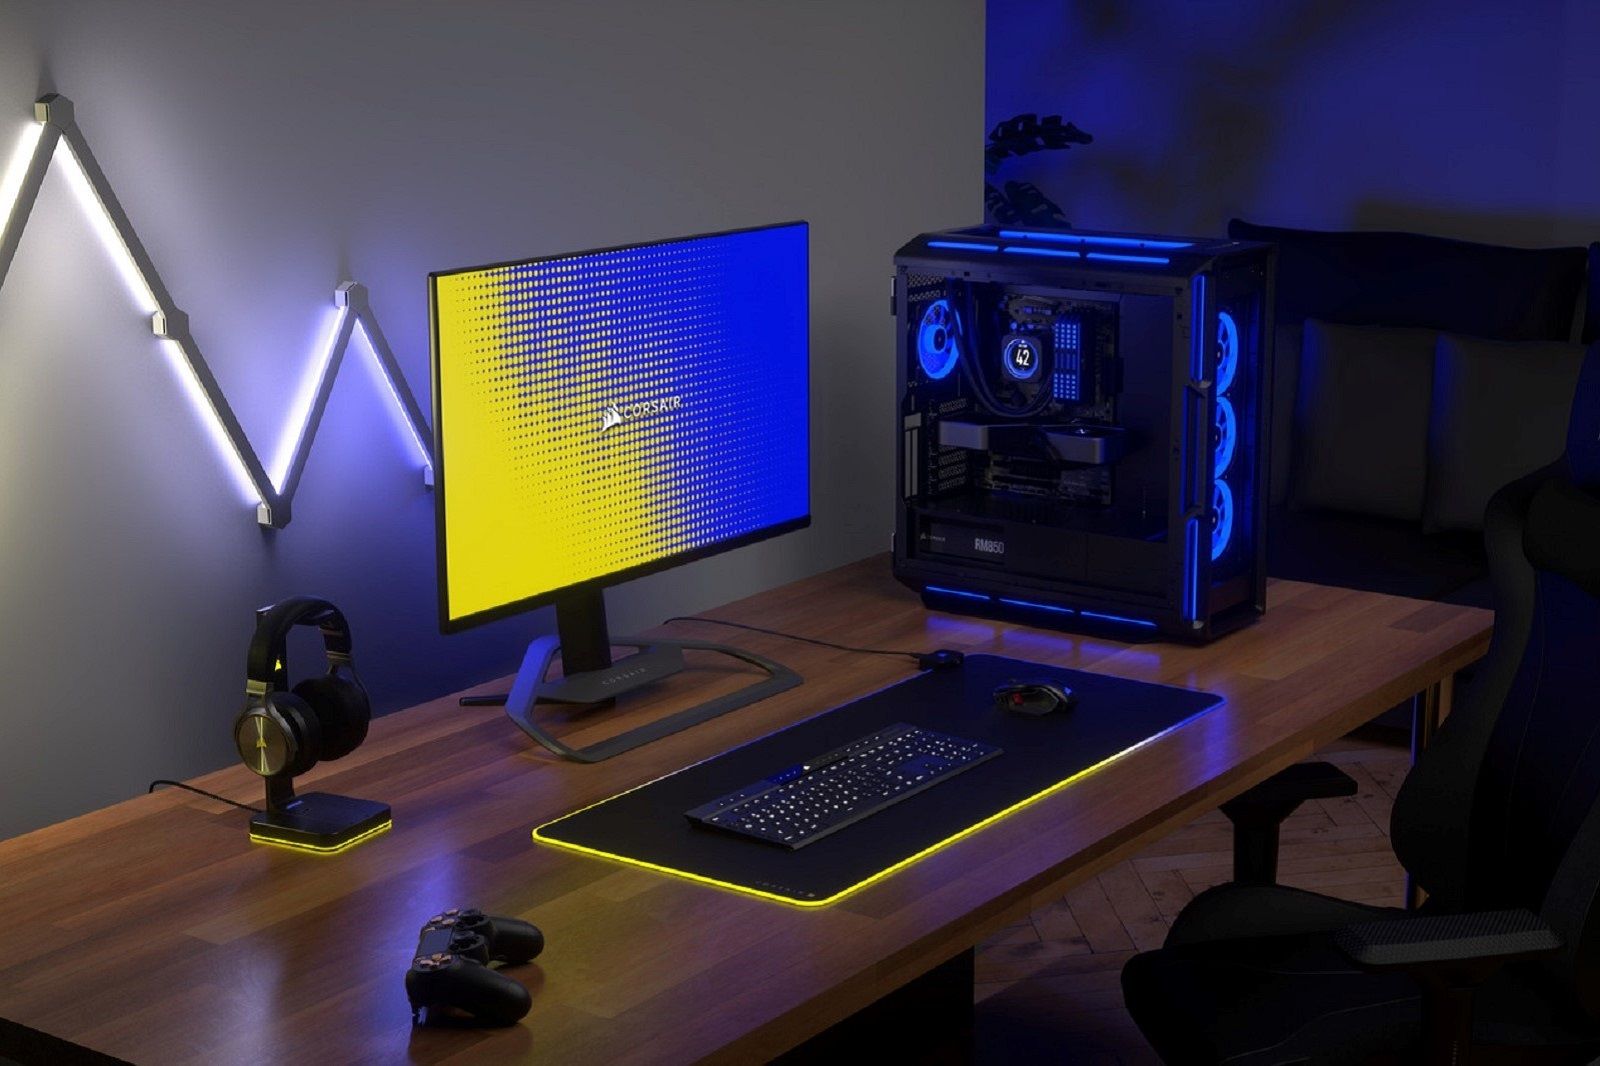 PC, monitor, keyboard, and headphones on a desk with RB lighting elements